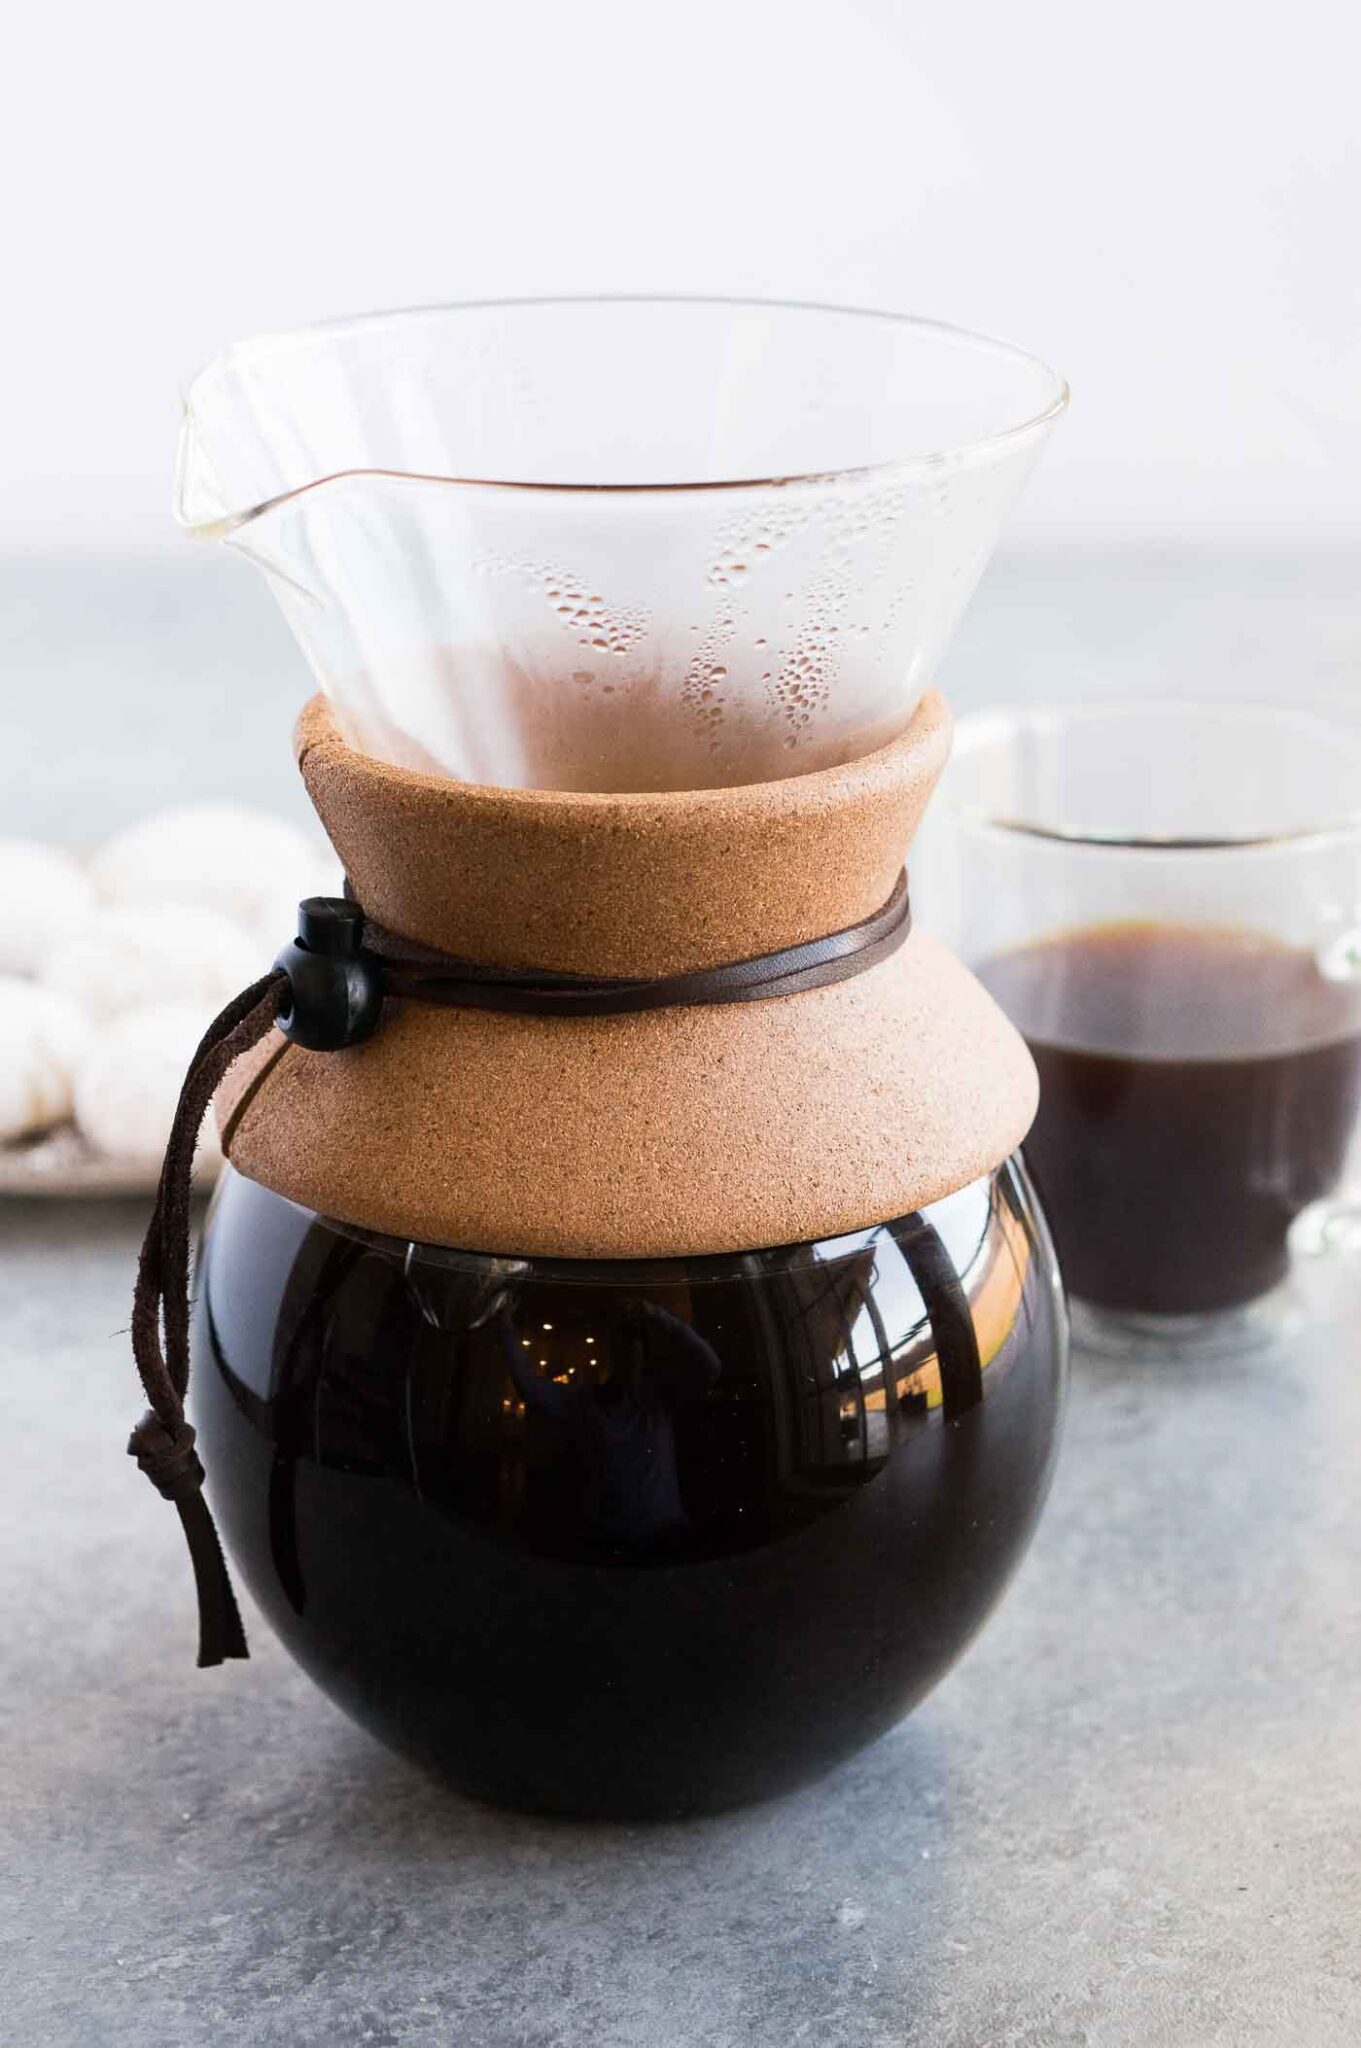 https://www.deliciousmeetshealthy.com/wp-content/uploads/2021/12/Pour-Over-Coffee-12-scaled.jpg